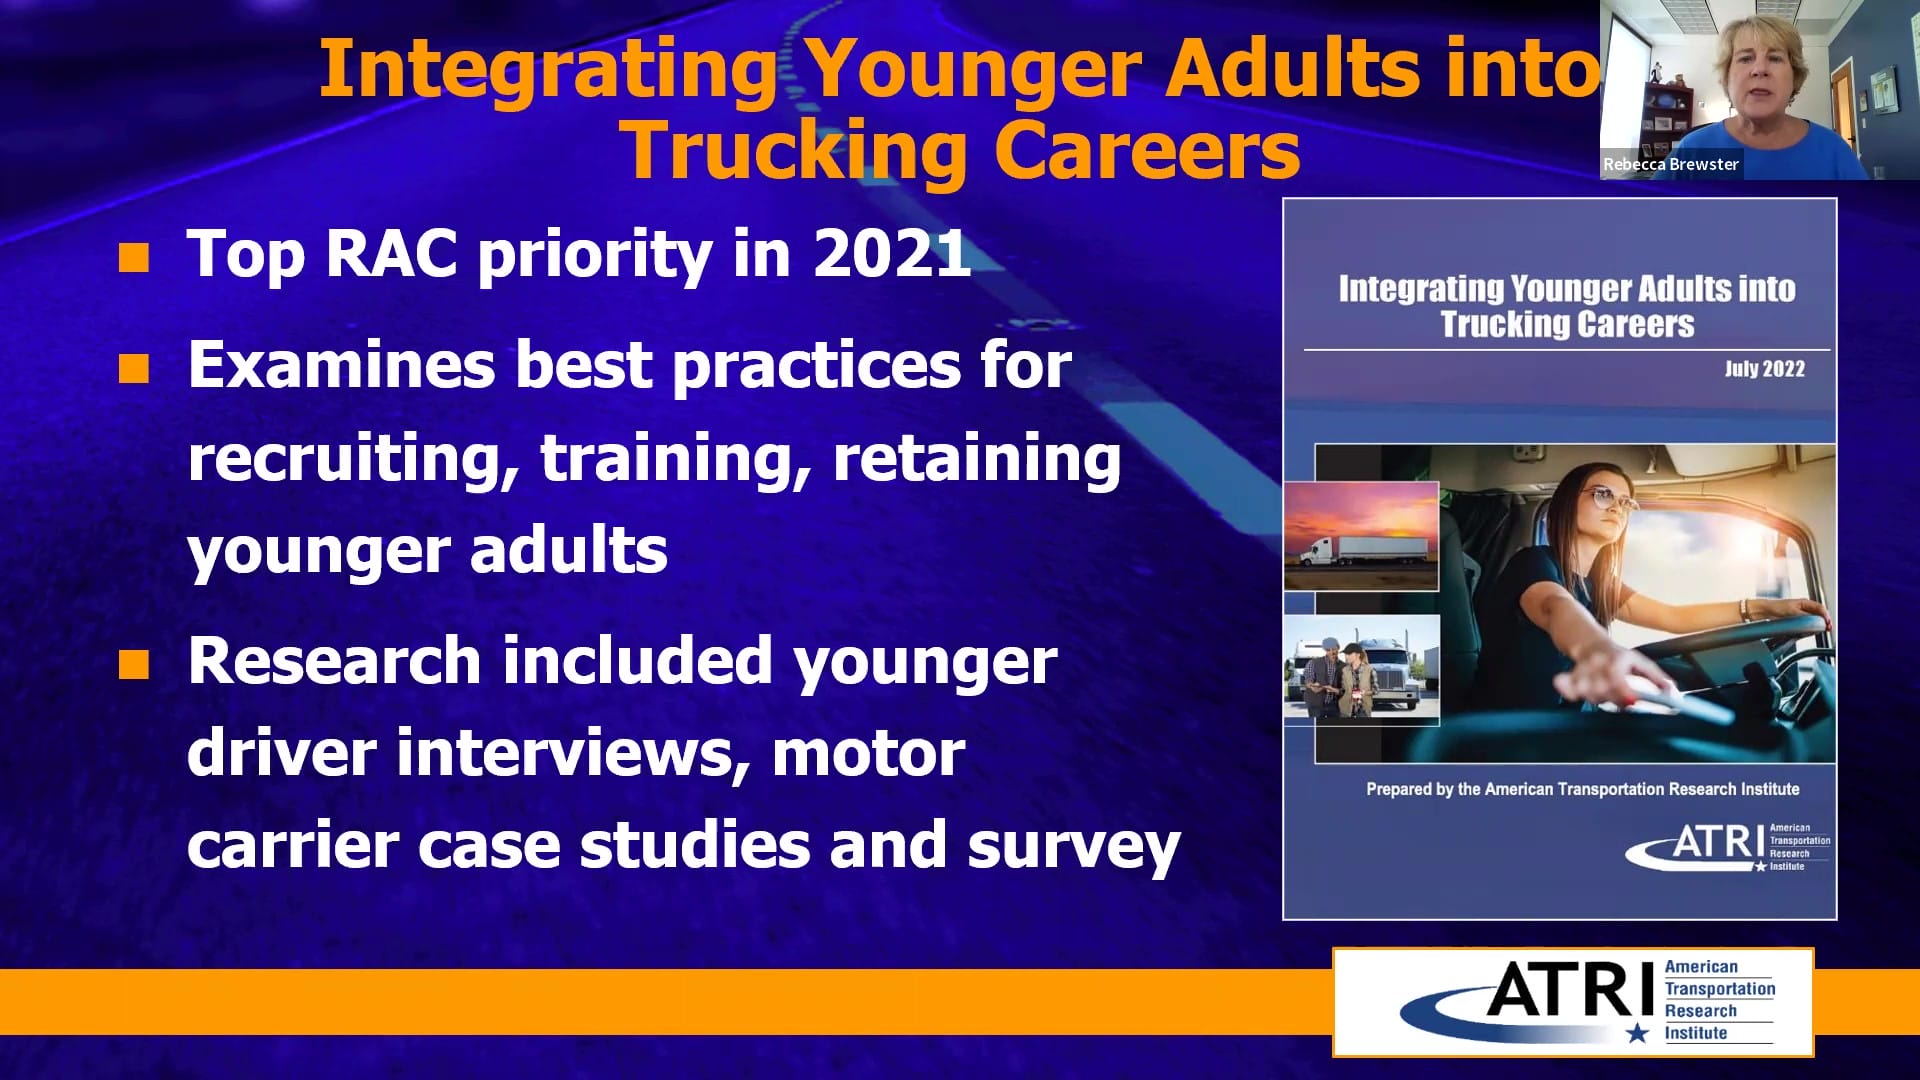 Top 10 Trucking Industry Concerns Integrating Younger Adults into Trucking Careers